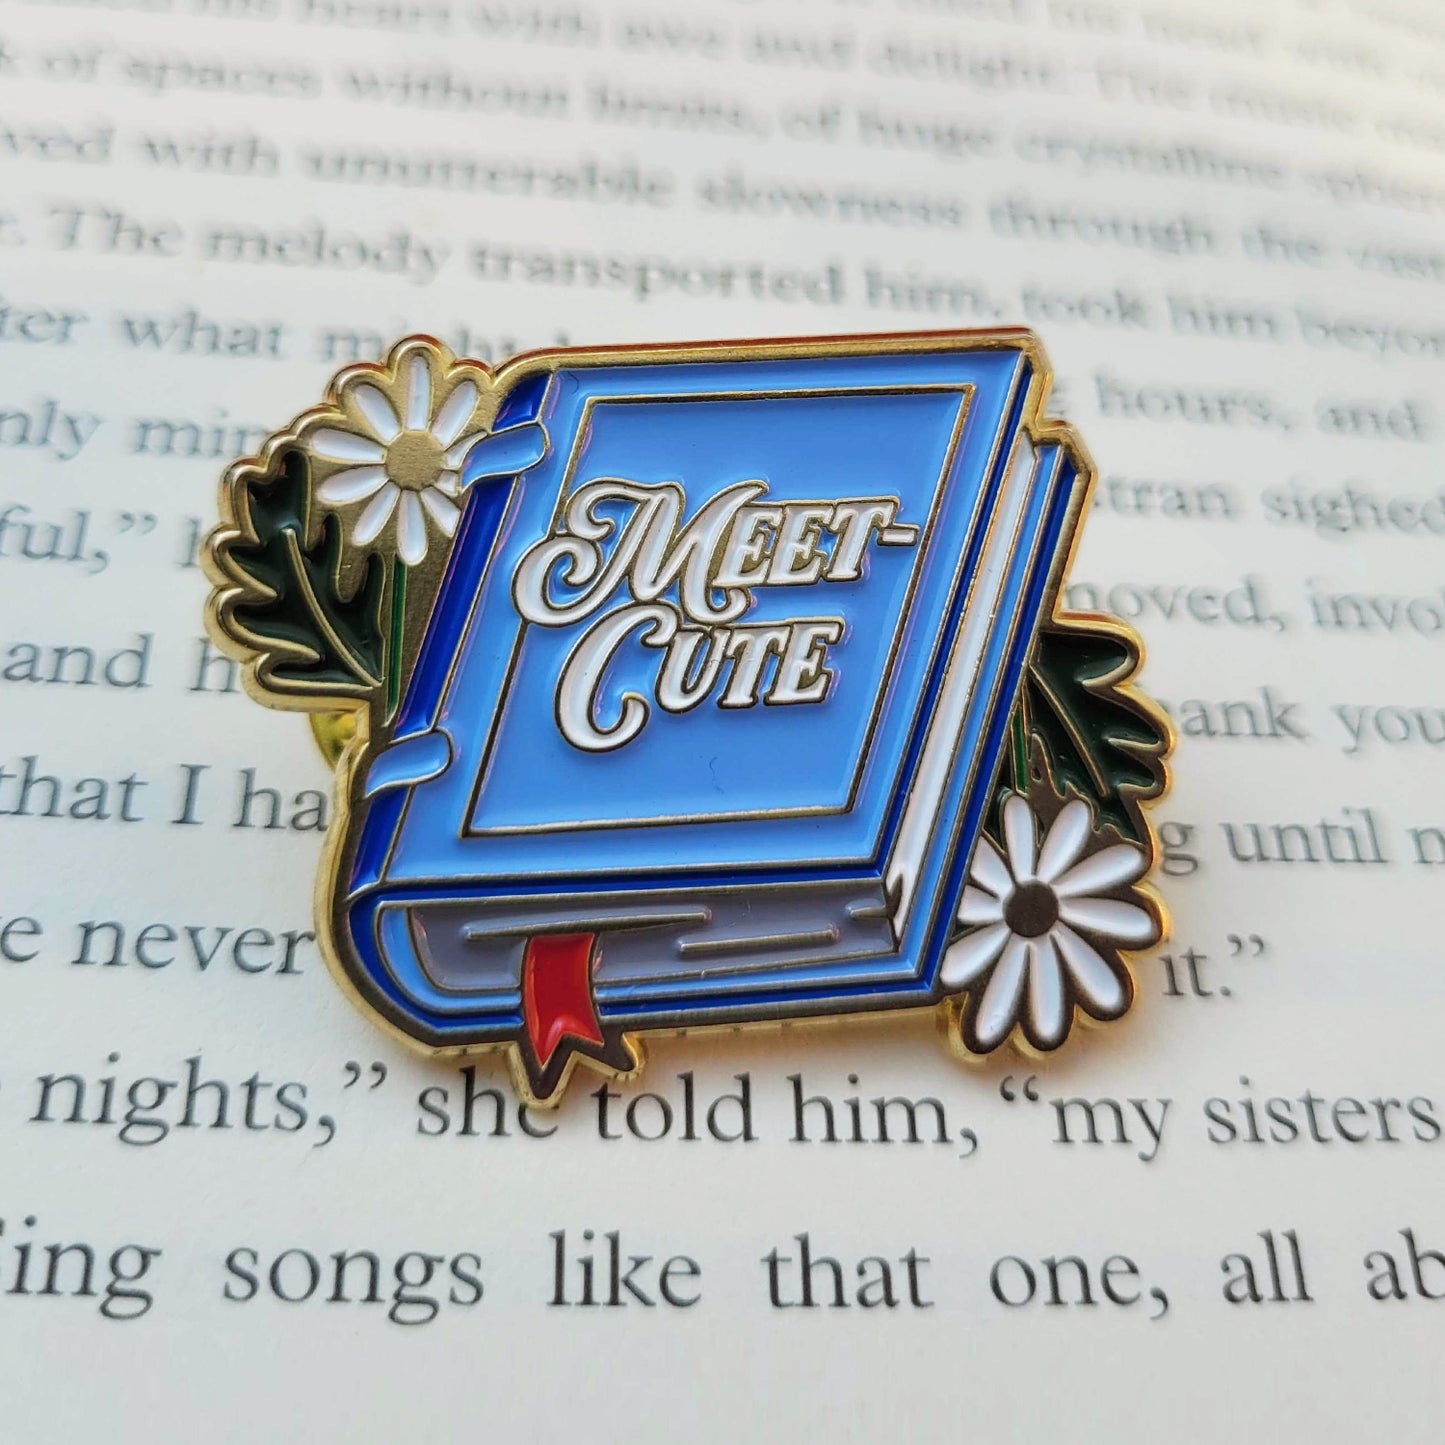 A blue enamel pin on a book page. The pin is shaped like a book, with white flowers on on each side, White text on the cover says "meet-cute."